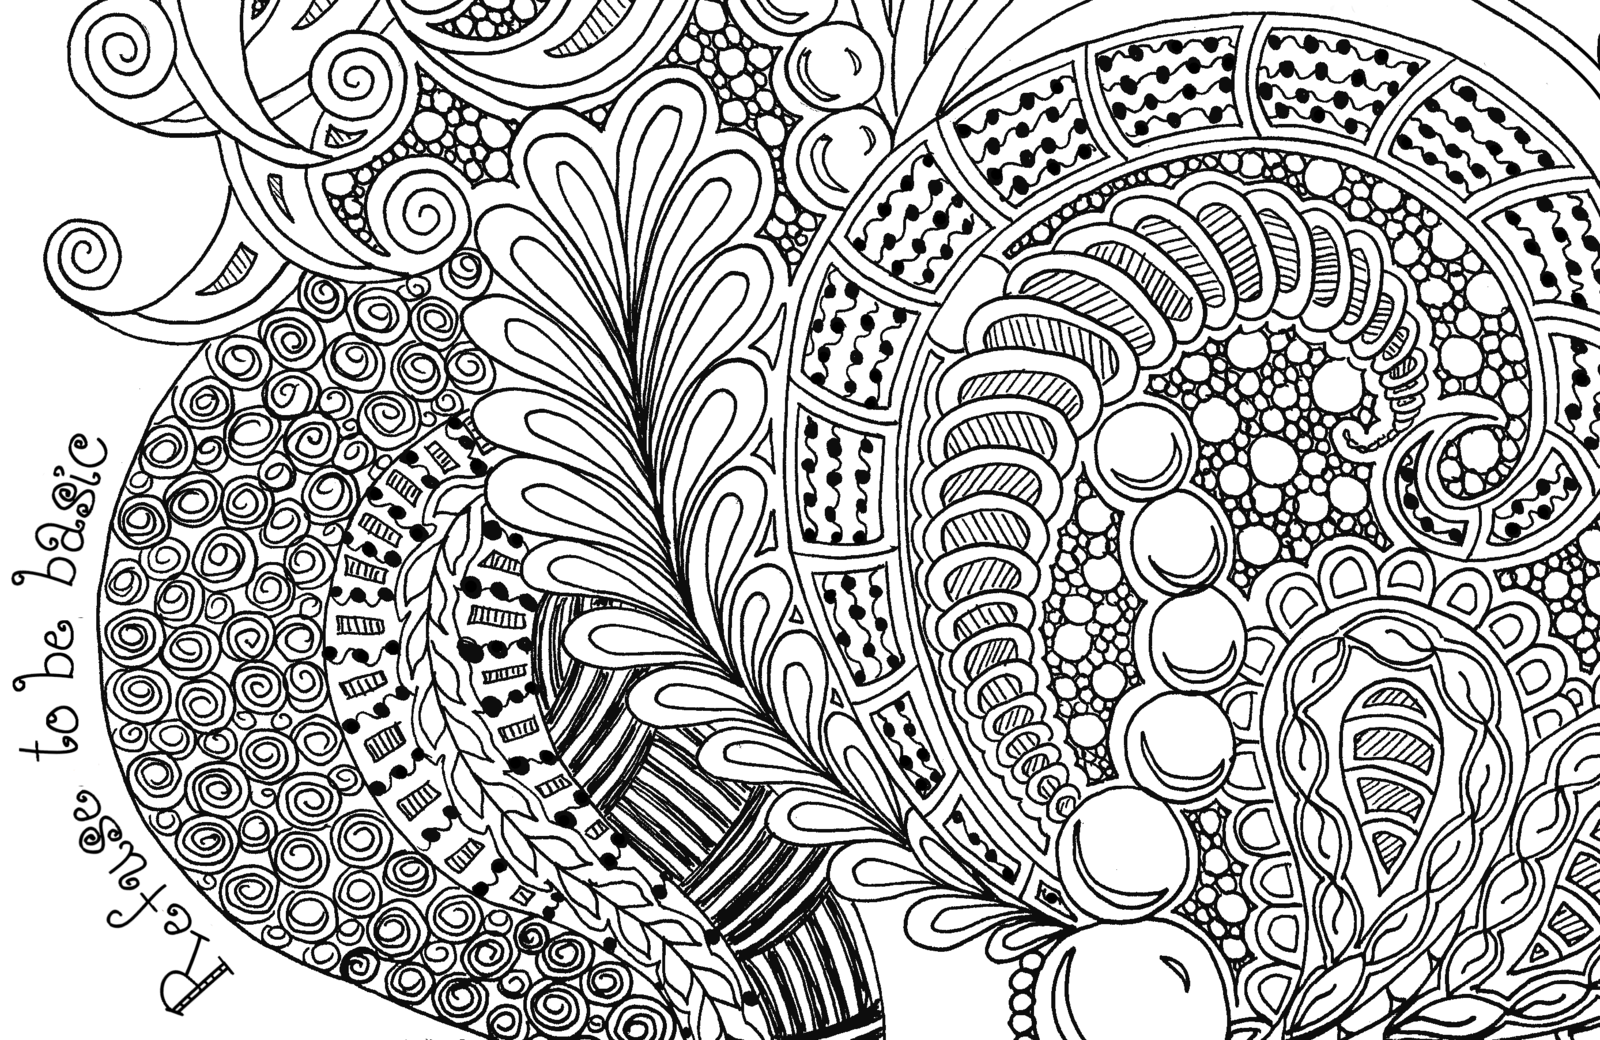 Free Printable Zentangle Coloring Pages Free, Download Free Printable